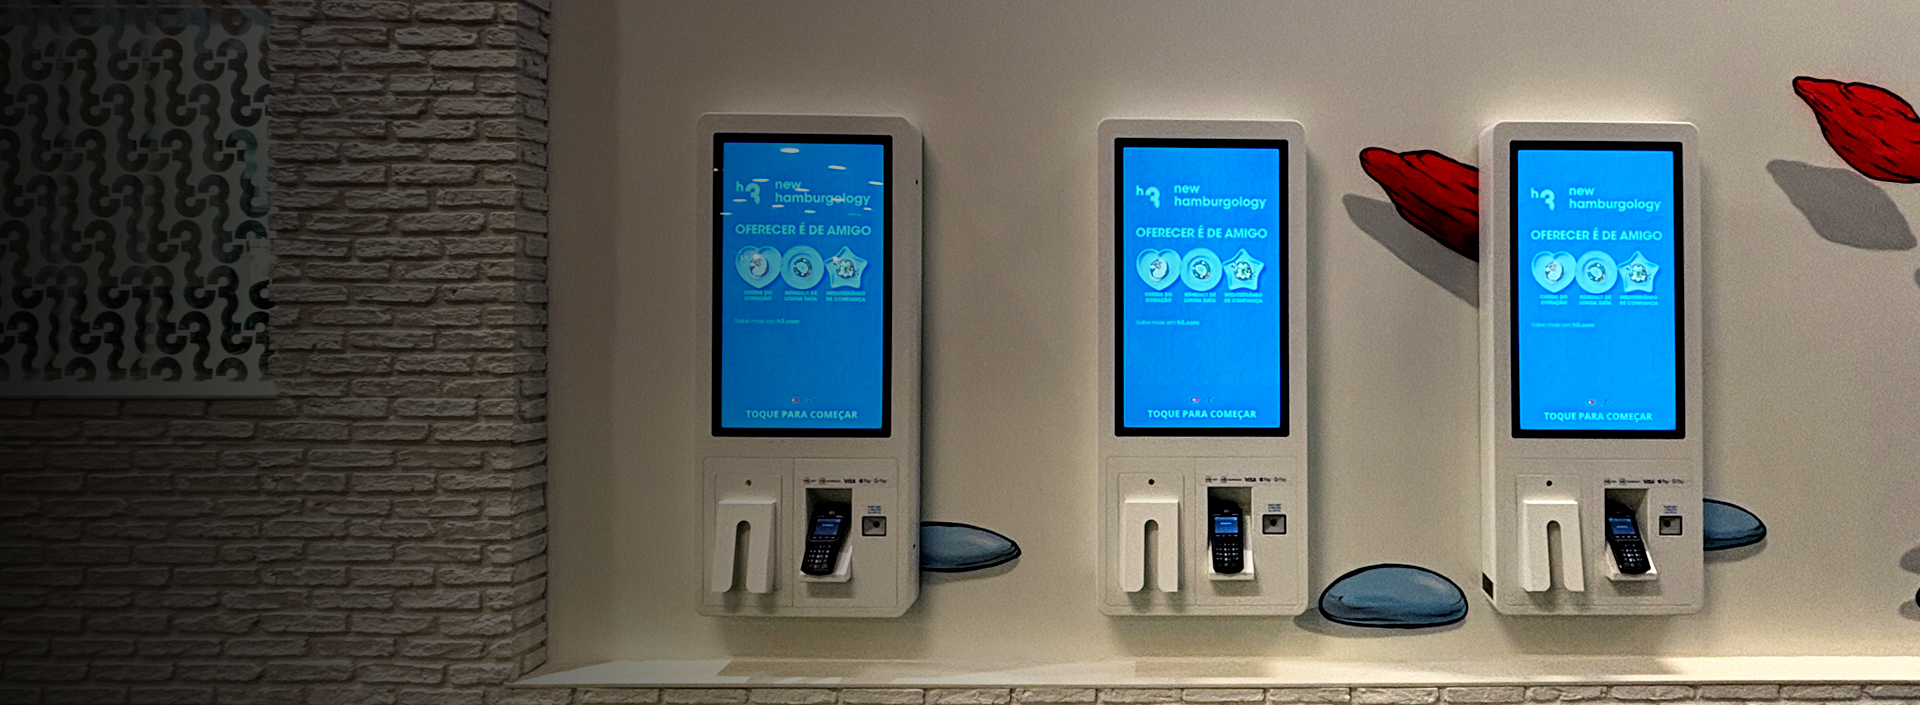 <span class='text-highlight'>H3 Restaurant</span>, in Norte Shopping, invests in PARTTEAM & OEMKIOSKS <span class='text-highlight'>Self-service Kiosks</span>